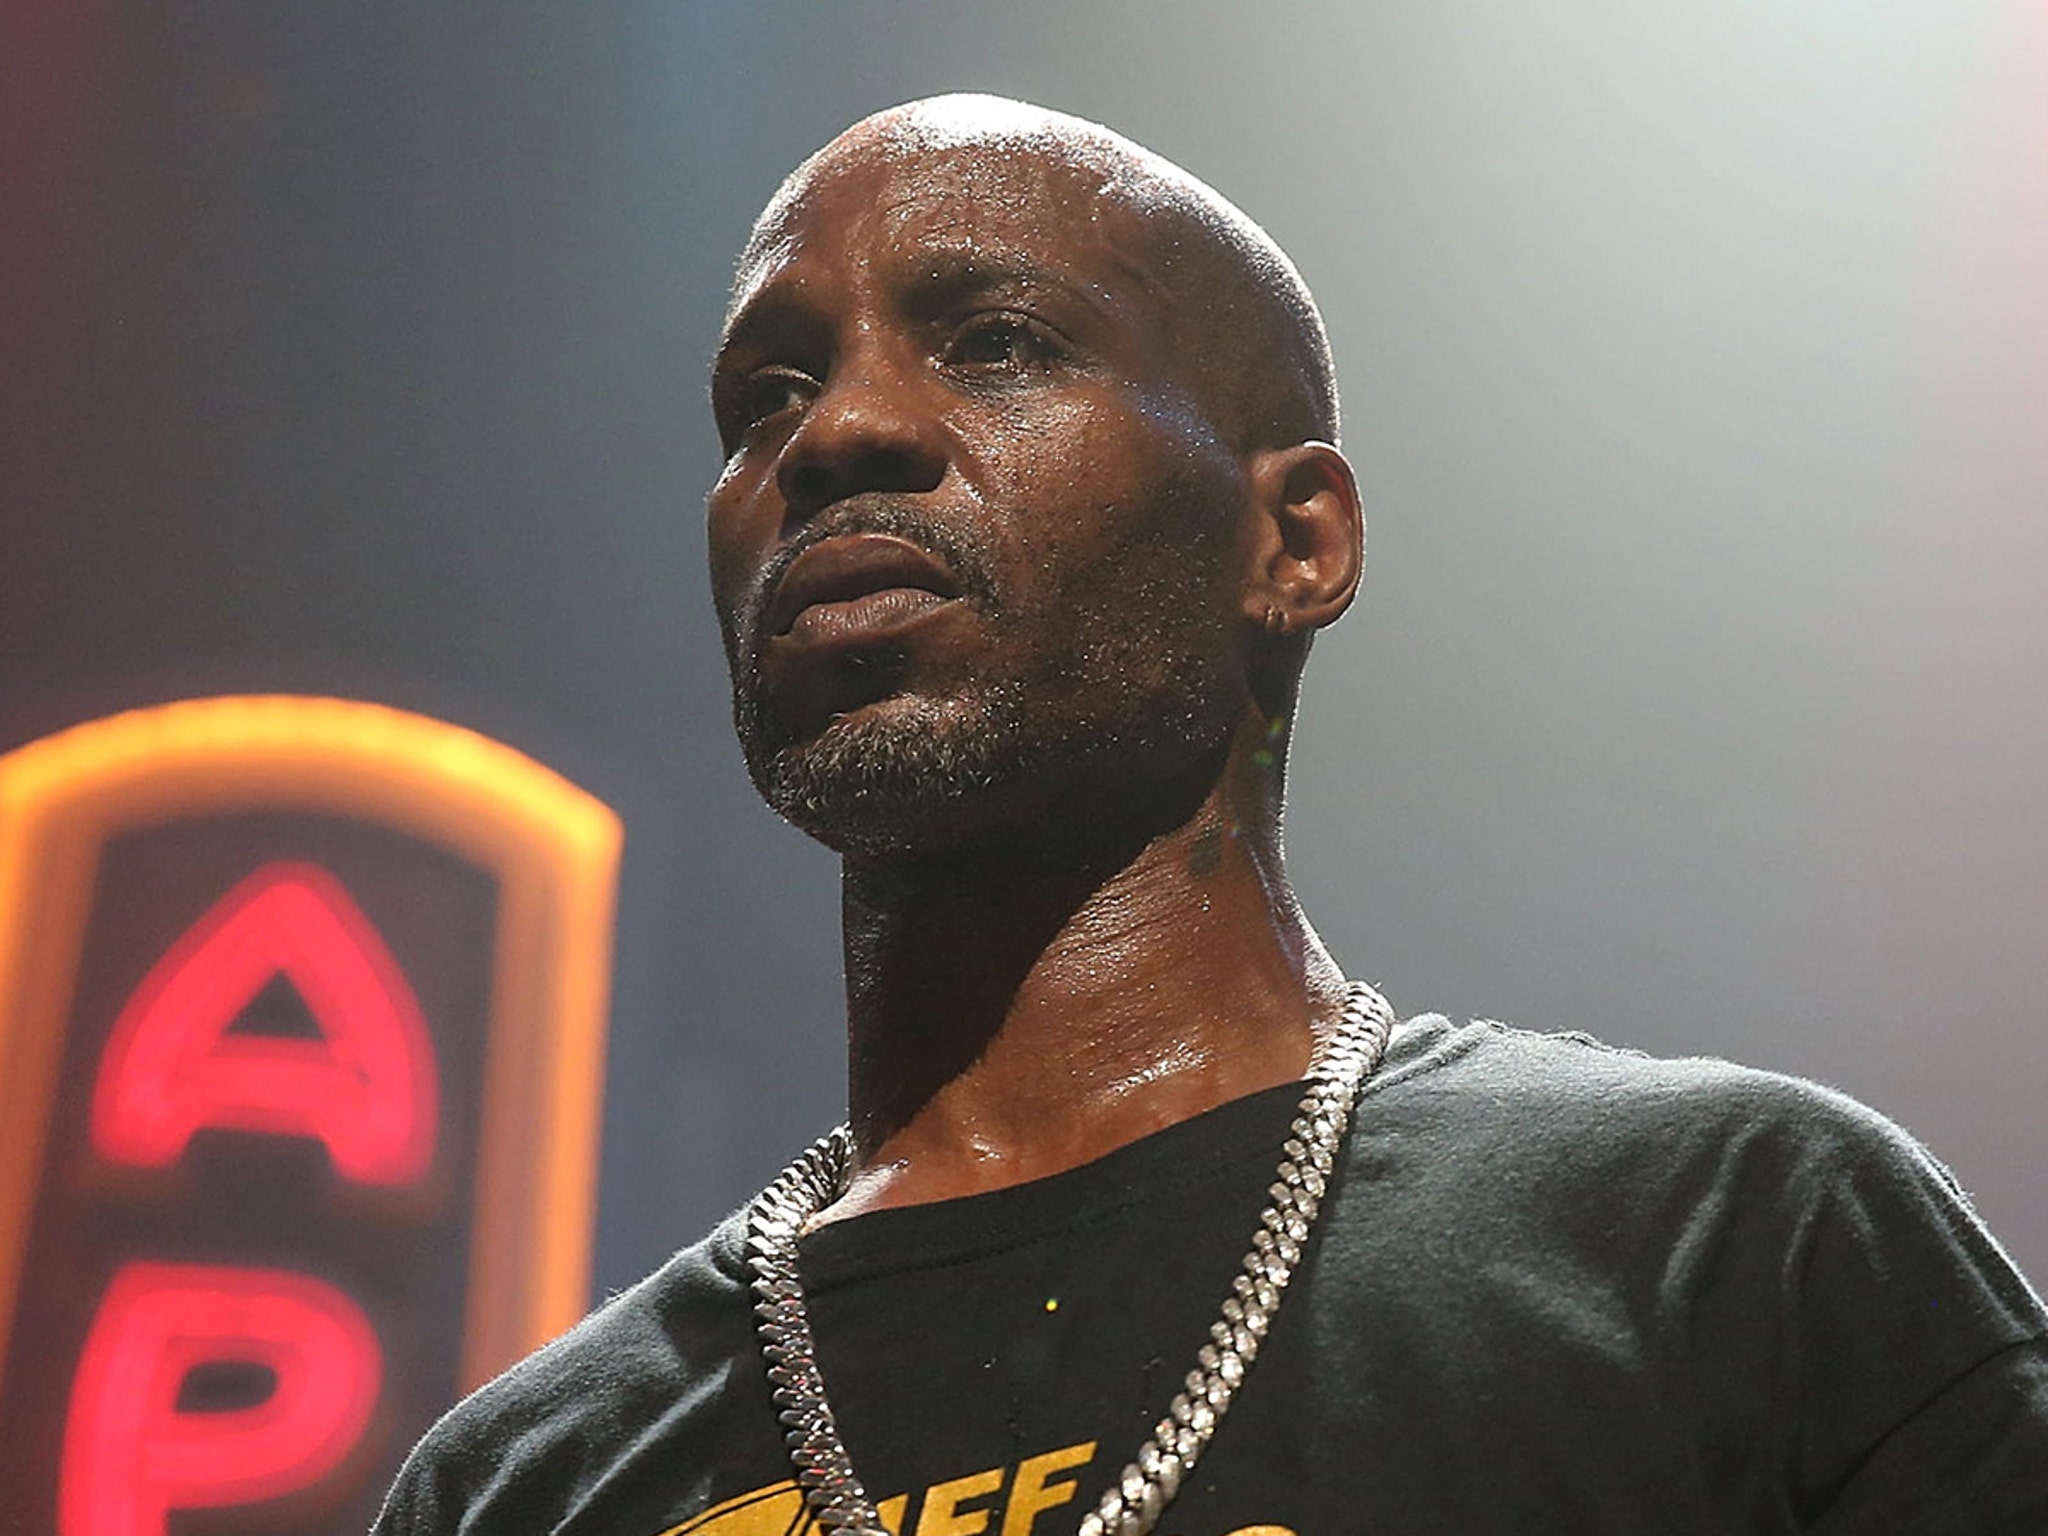 What happened to DMX and how did he die?